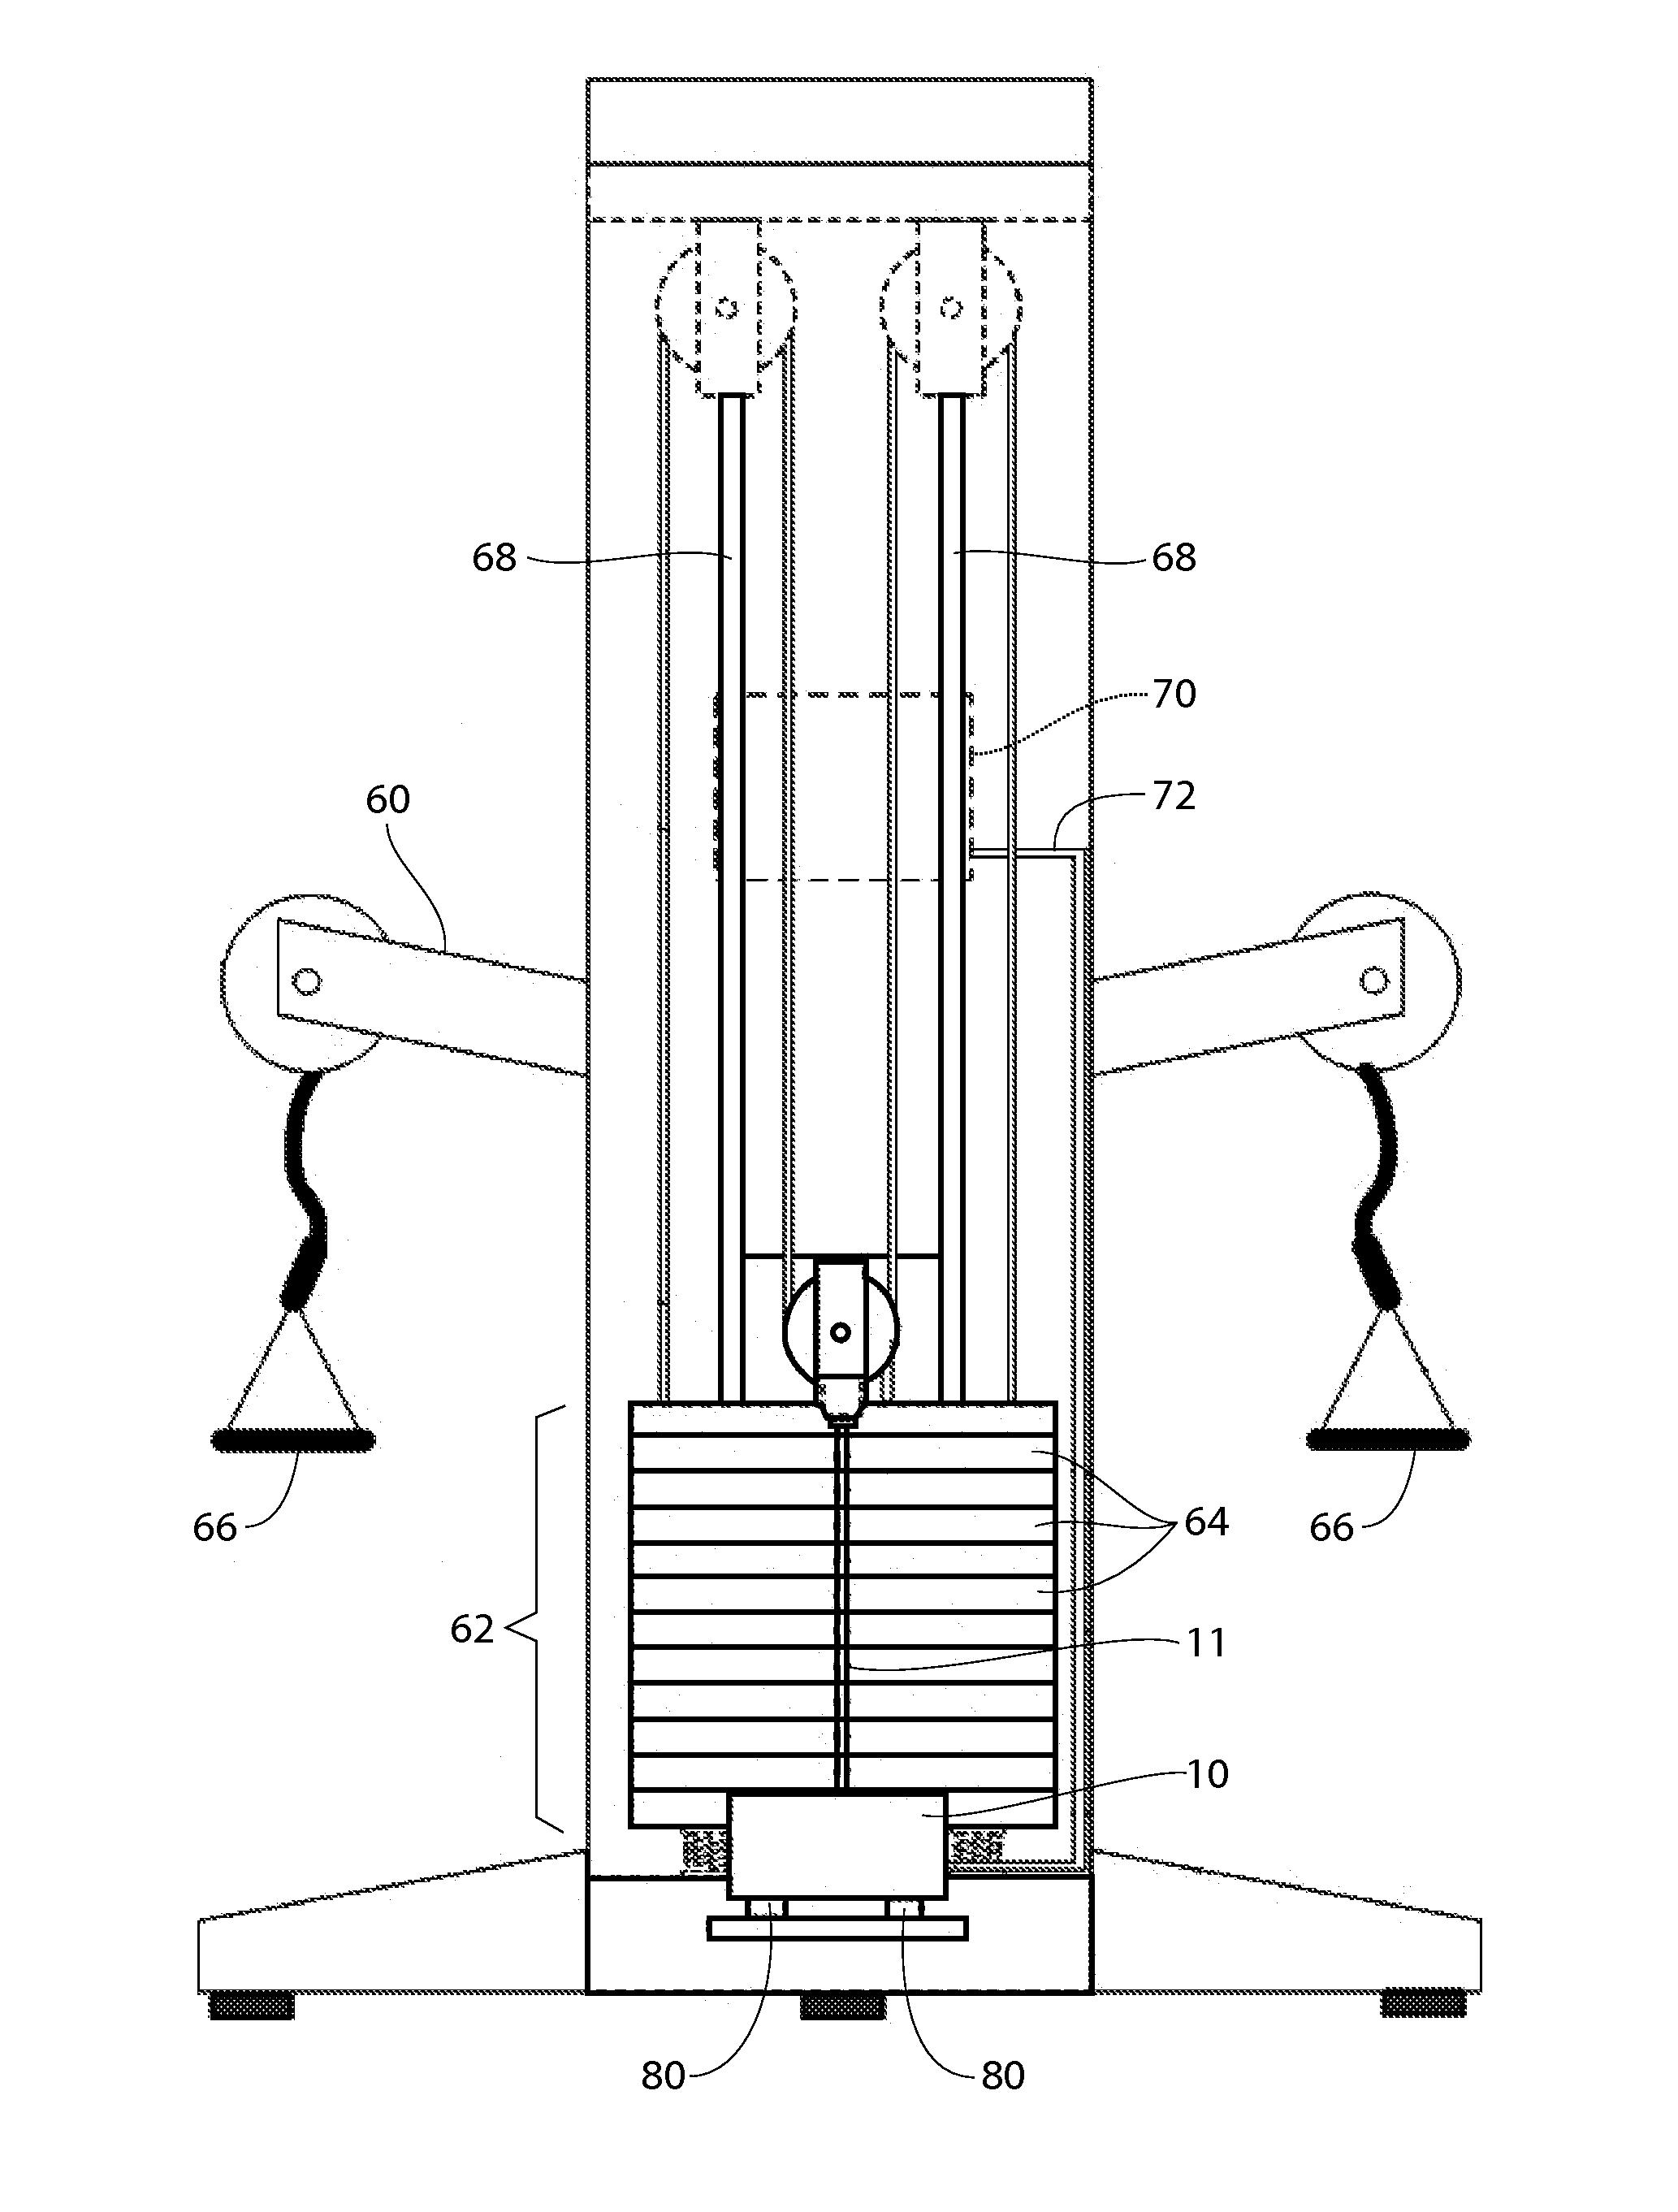 Systems and Methods Related to Coupling an Energy Harvester to Exercise Equipment